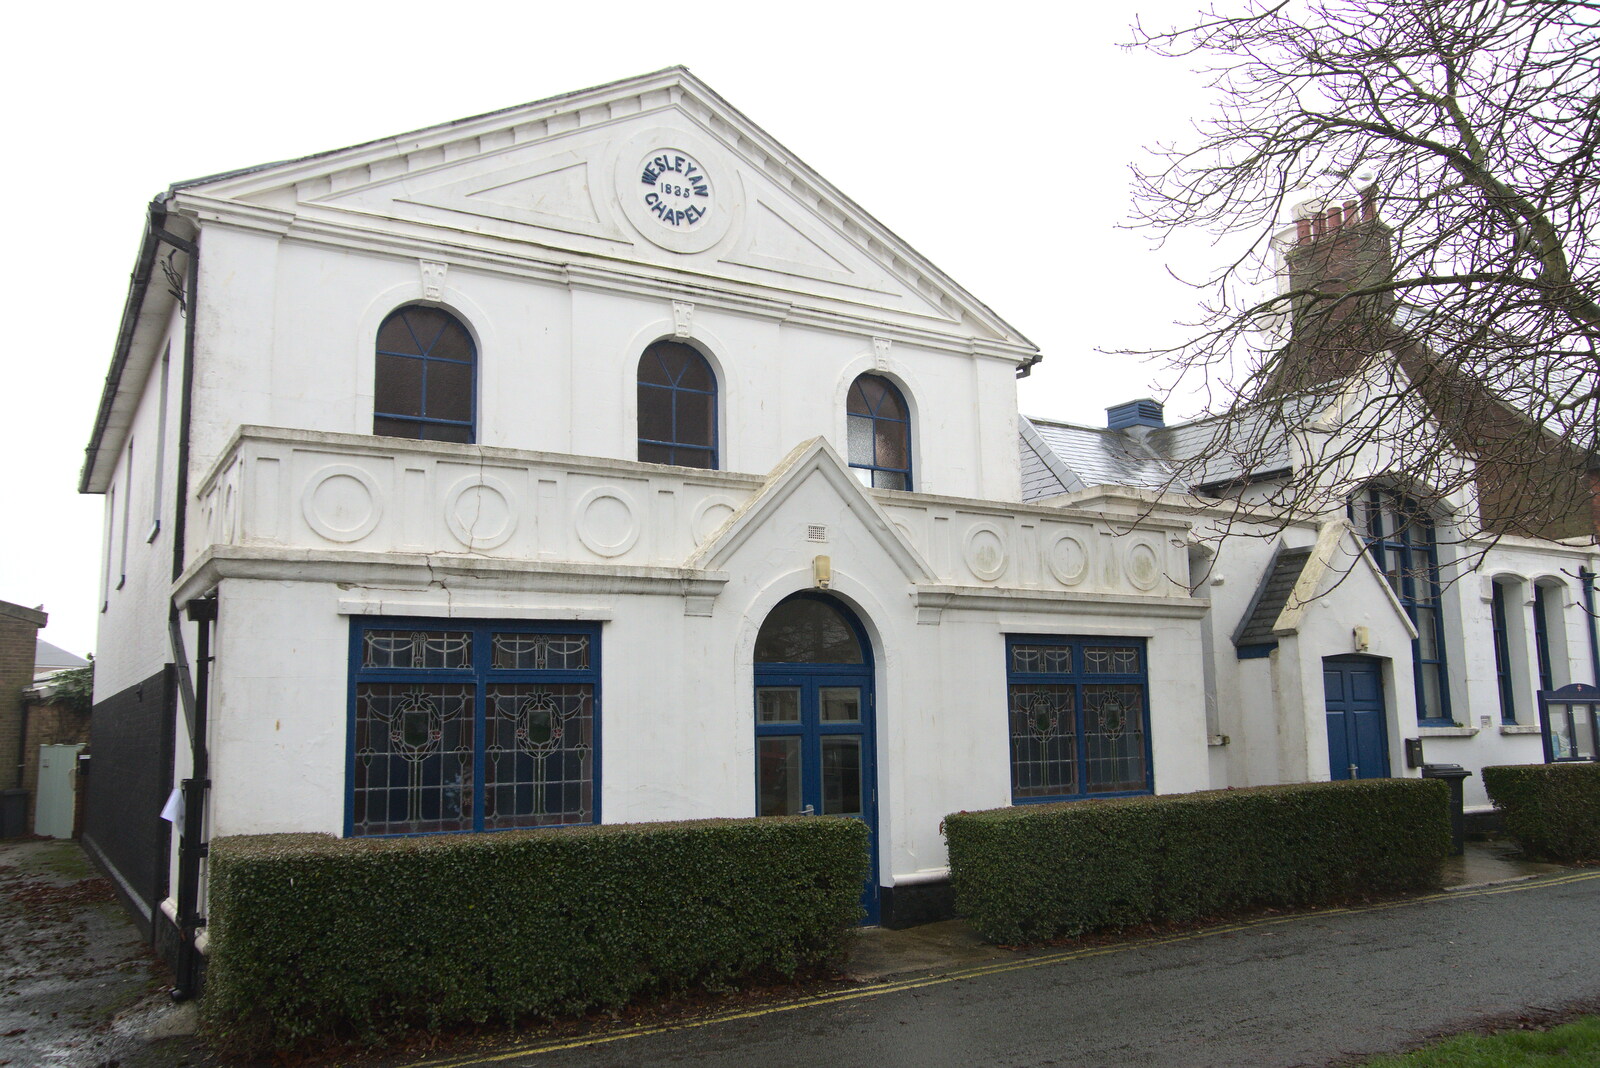 The Wesleyan Chapel from 1835 from A Few Hours at the Seaside, Southwold, Suffolk - 27th December 2021